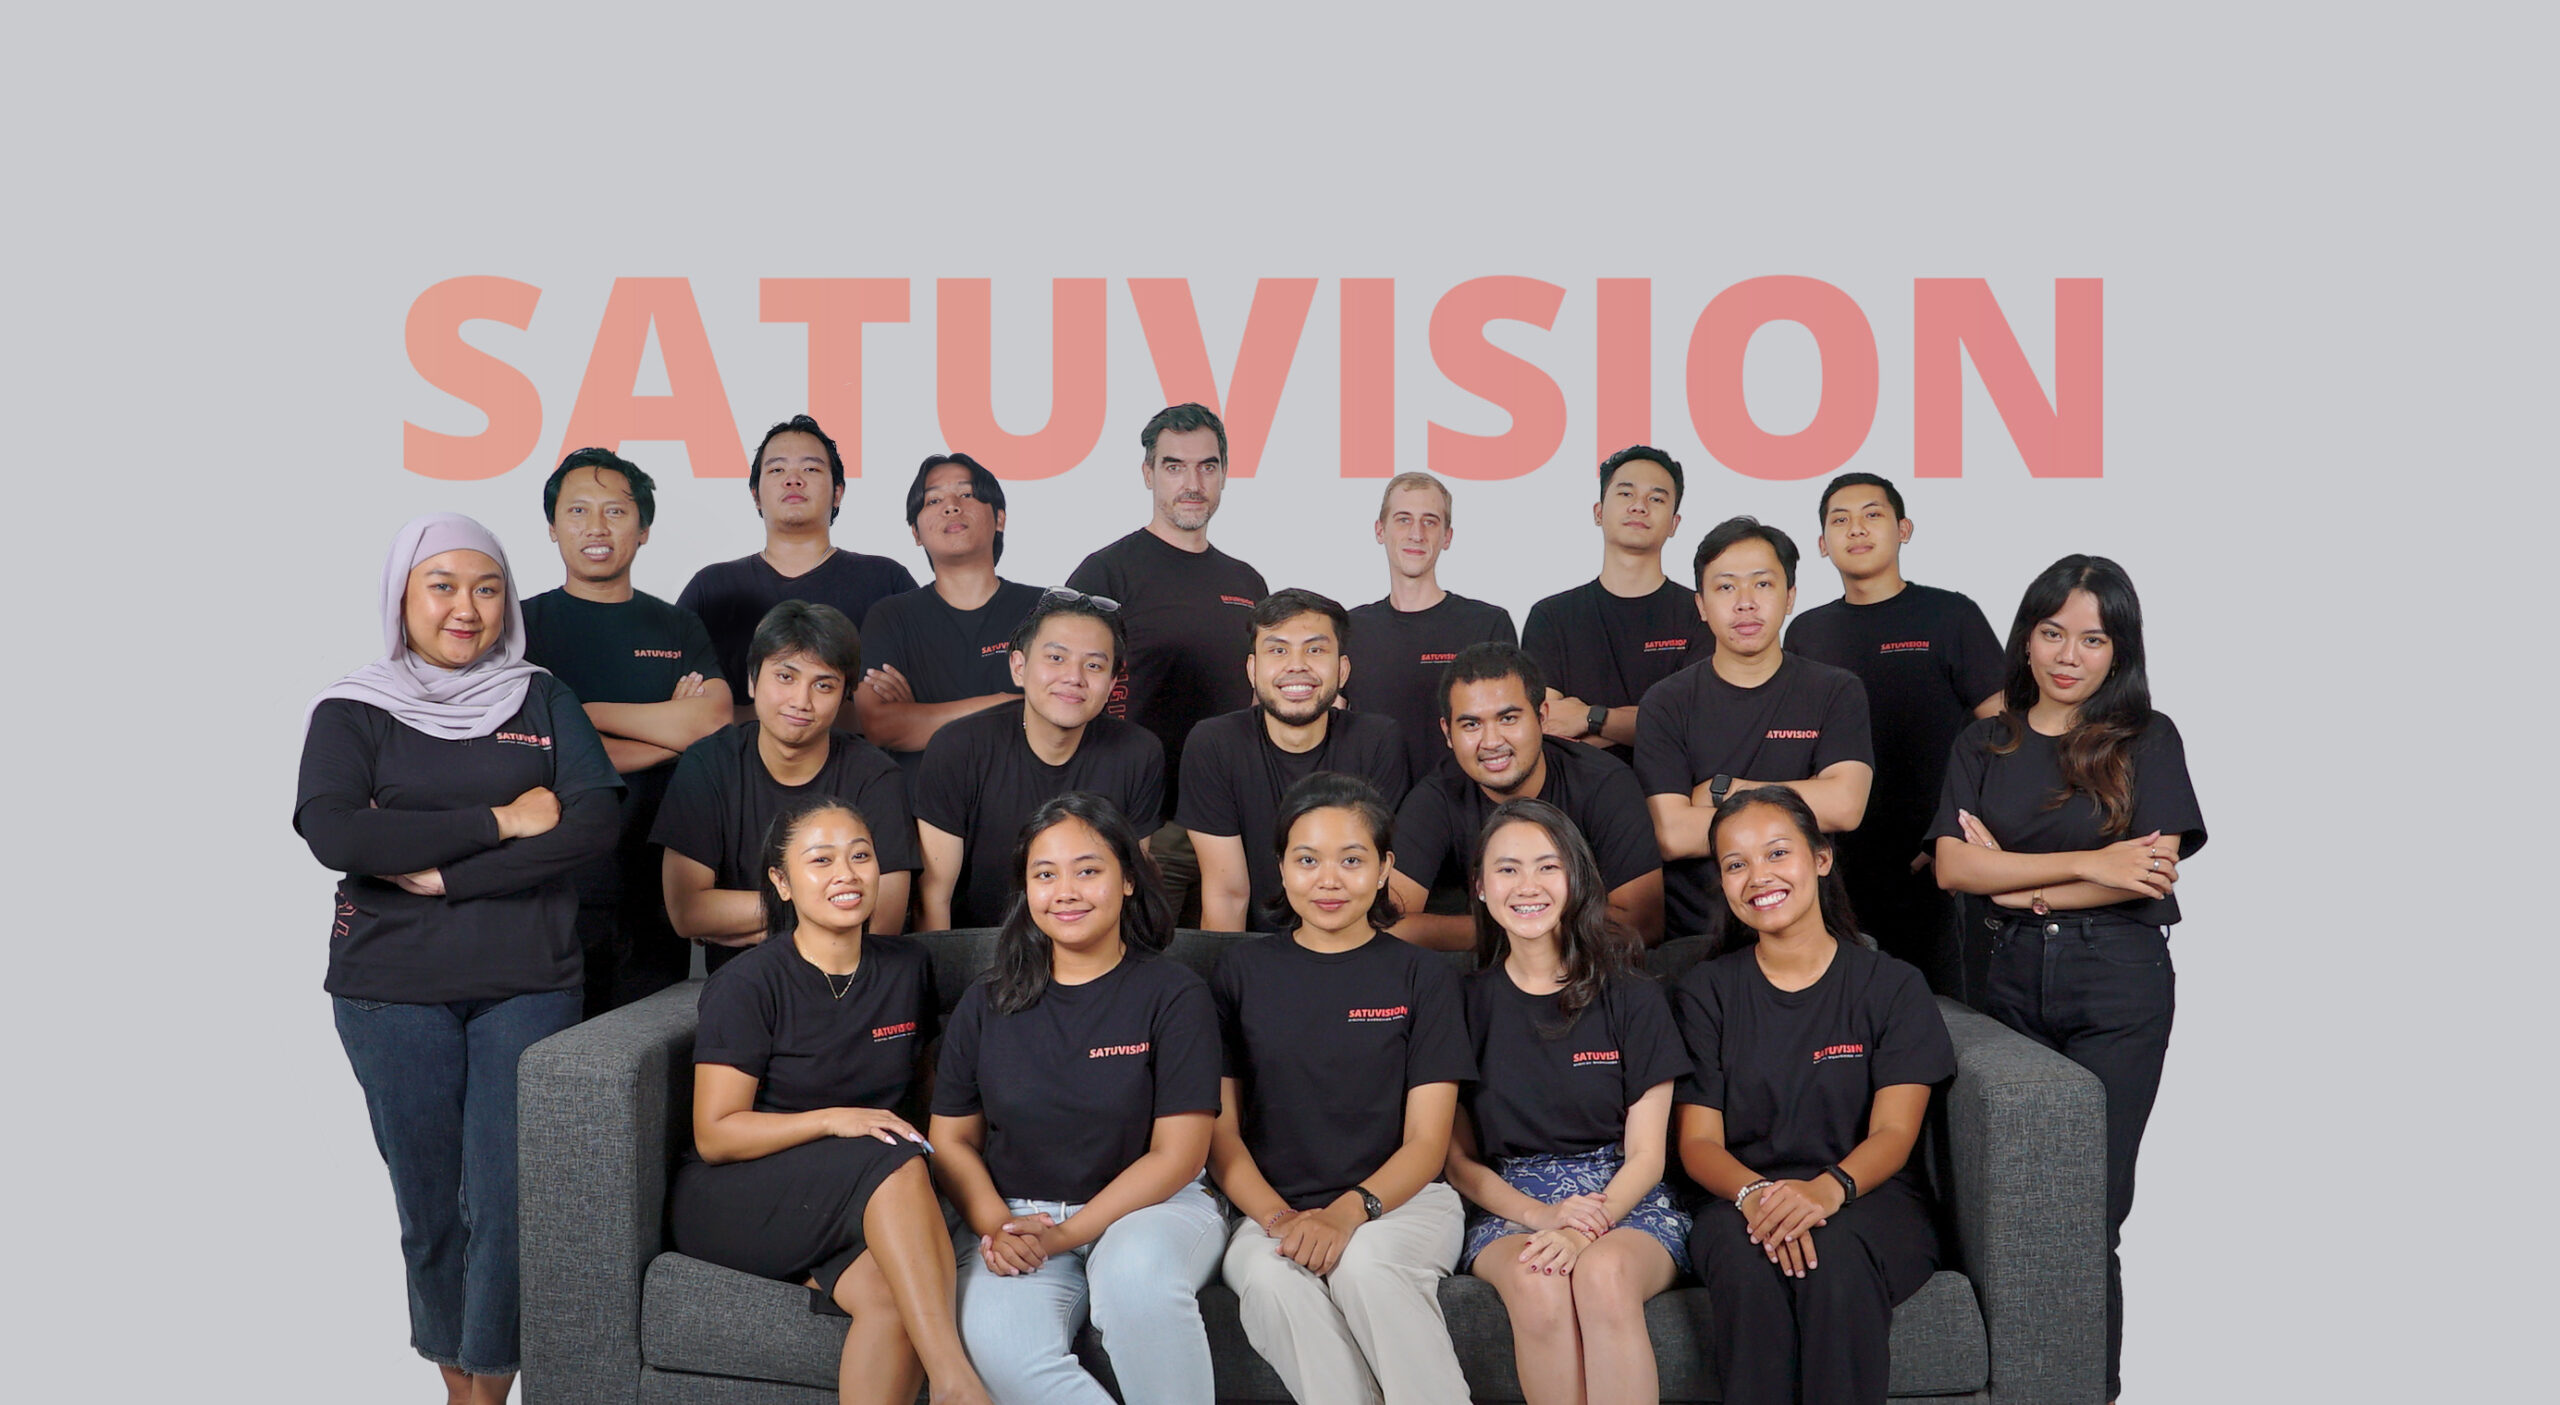 satuvision's members team with black shirt and white background and satuvision logo on it